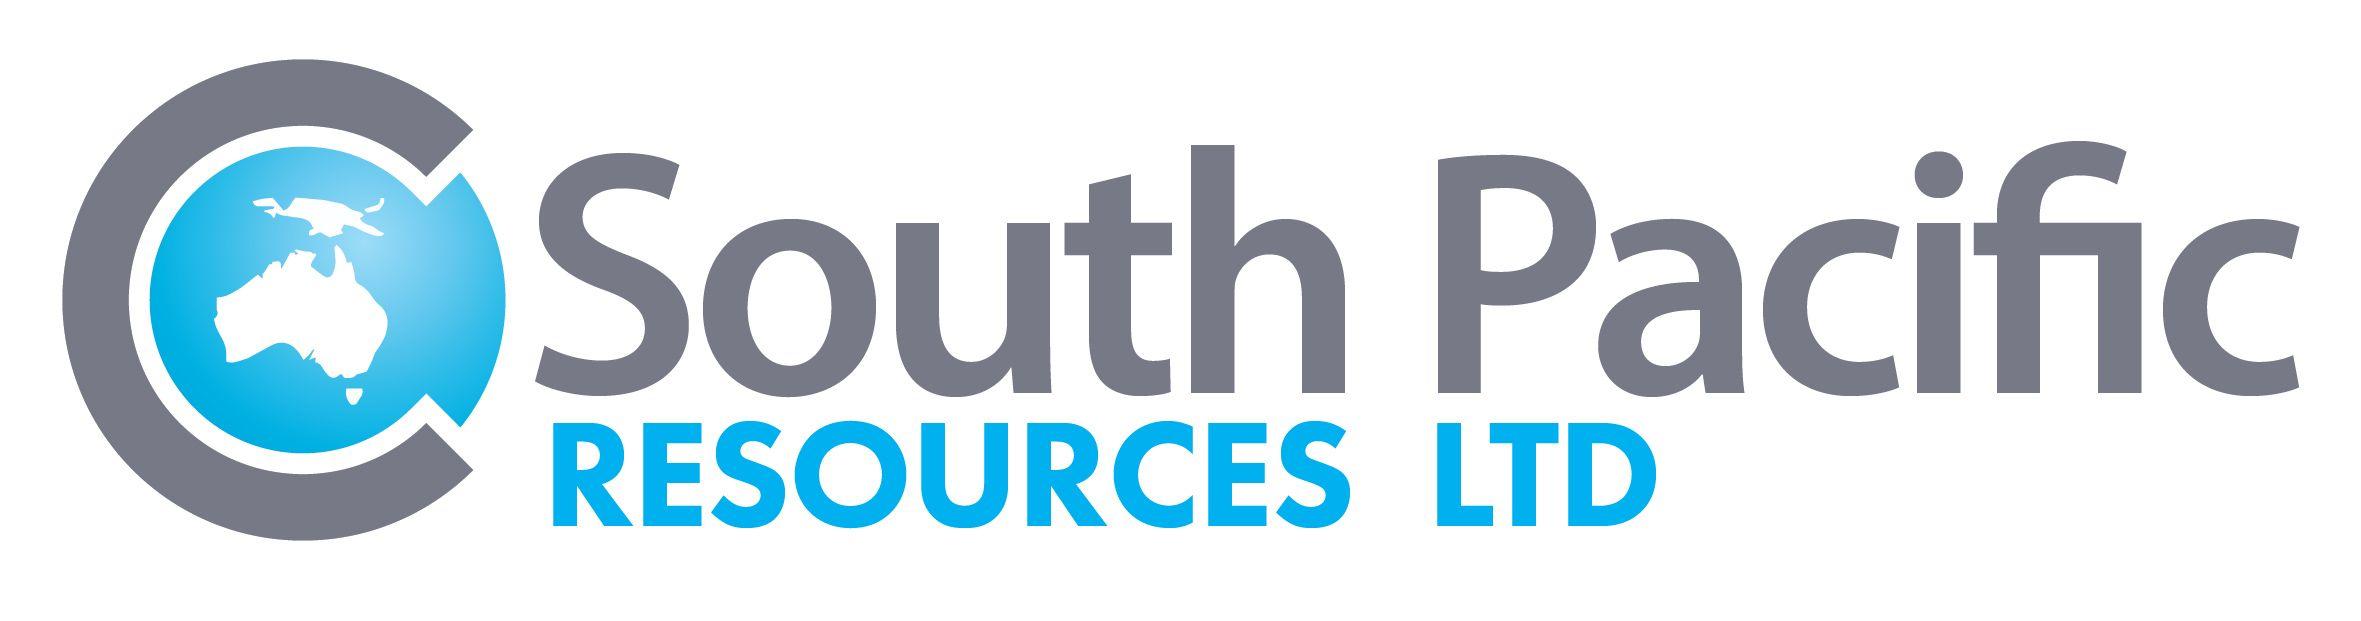 South Pacific Logo - South Pacific Resources | South Pacific Resources